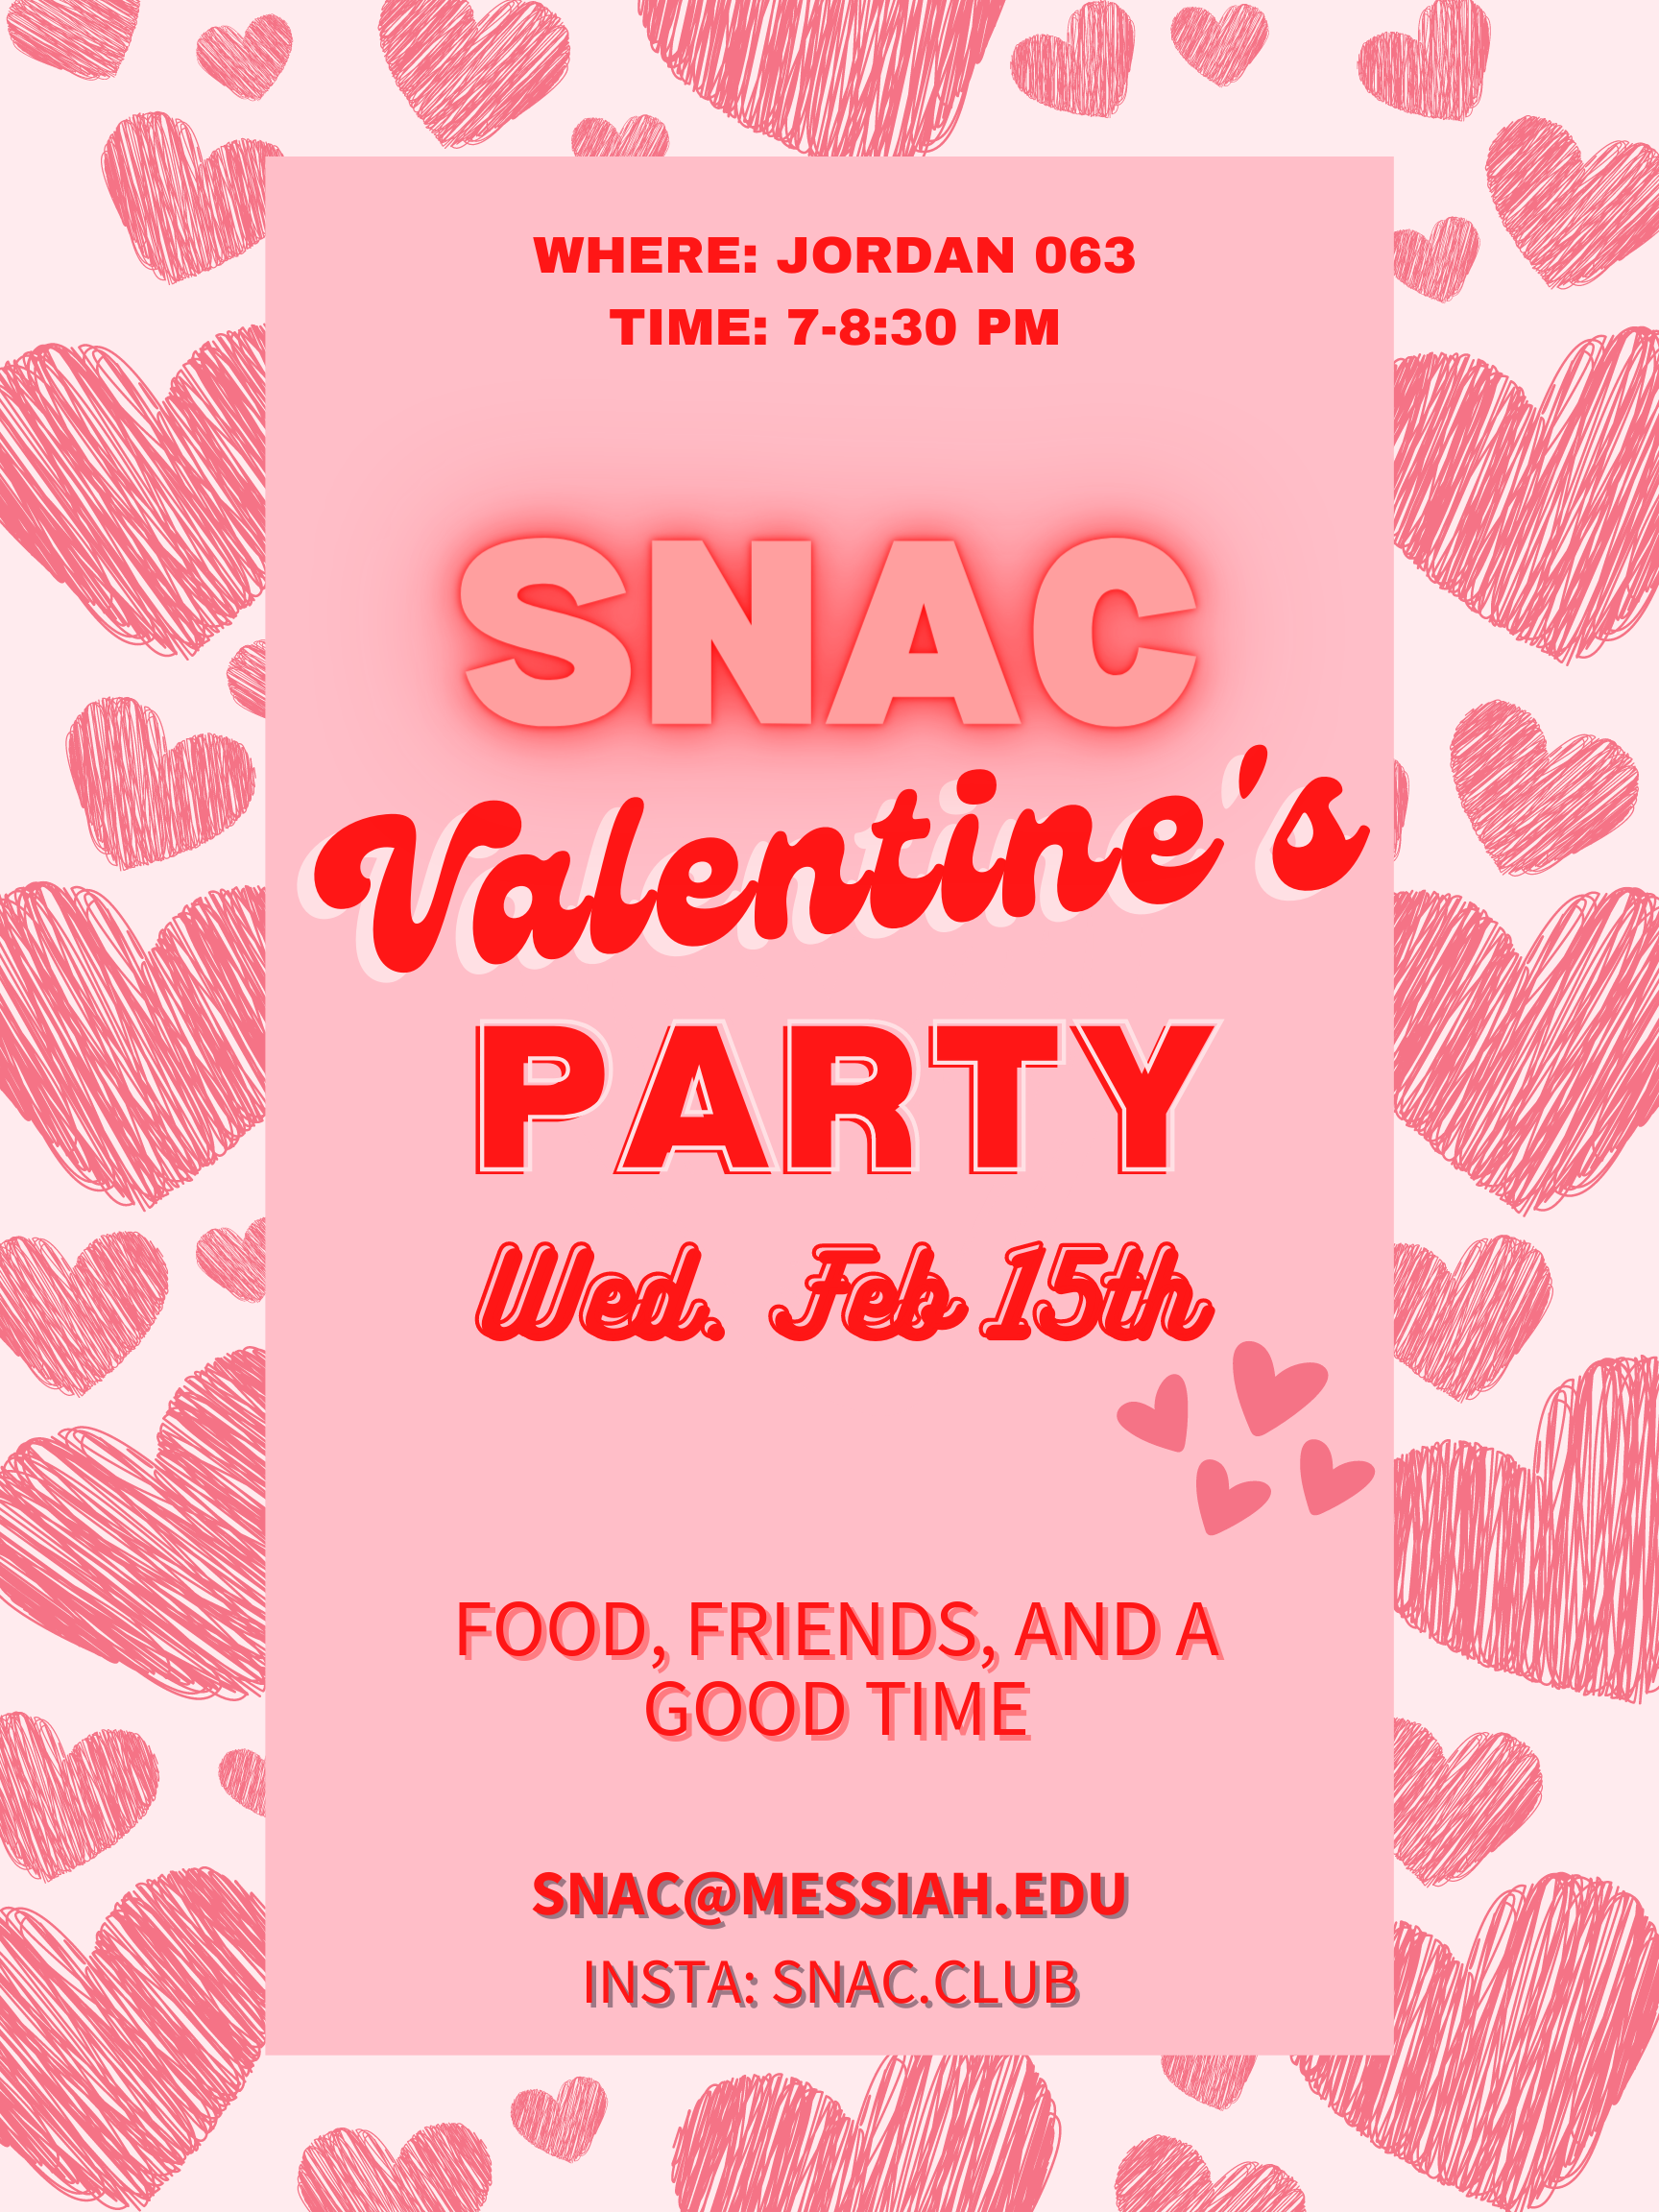 Snac valentines day party